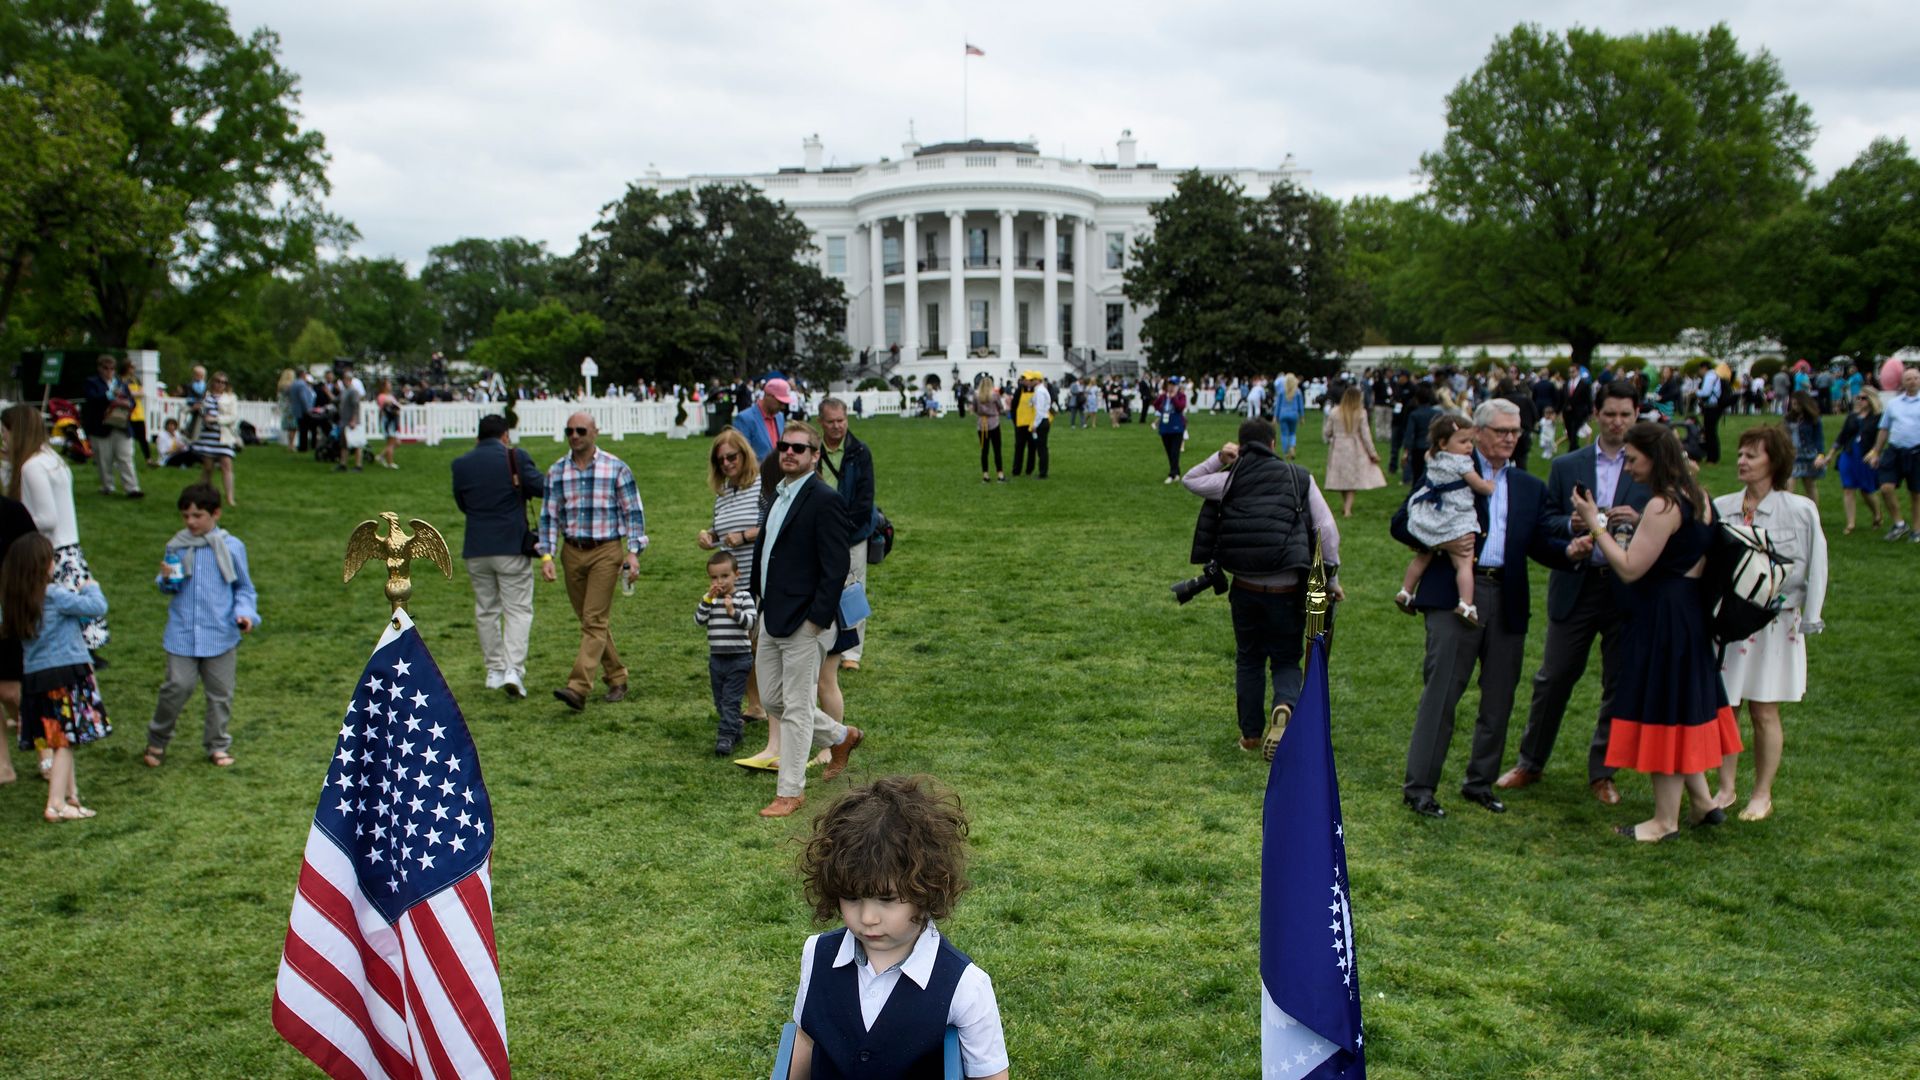 Picture of the crowd during the 2019 White House Easter Egg Roll